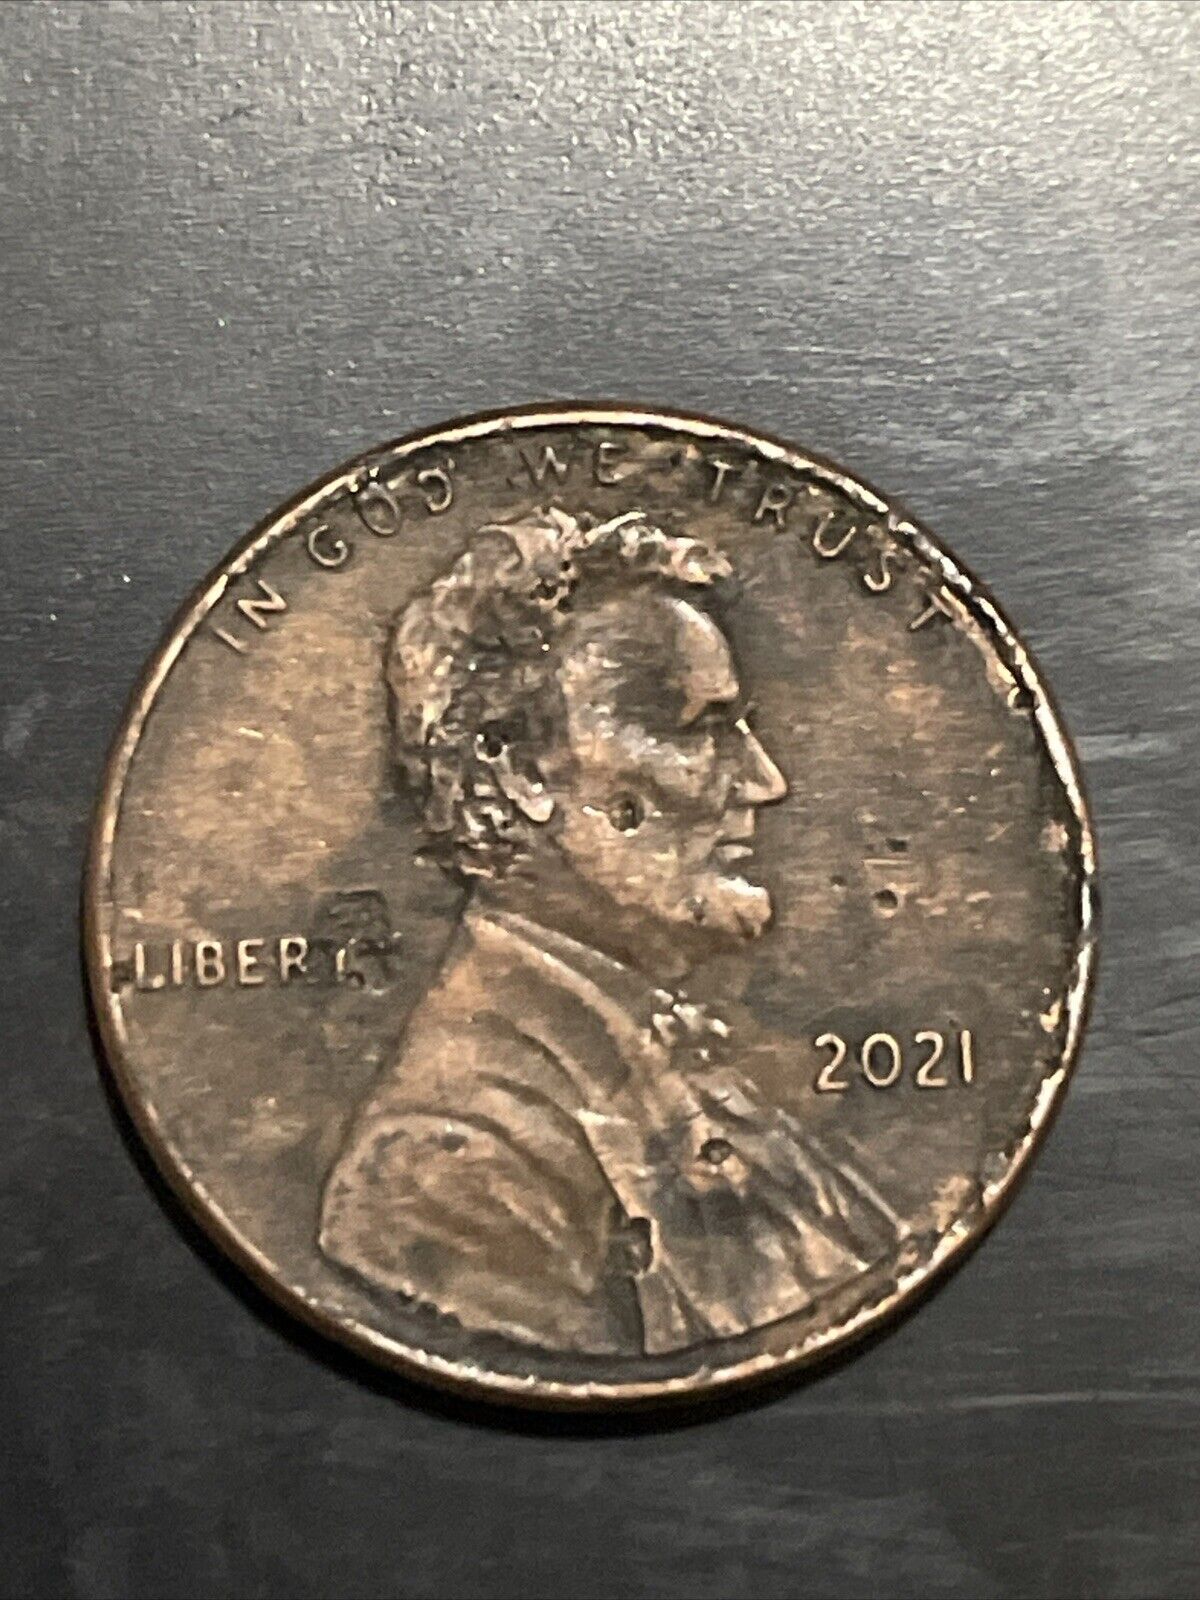 2021 Penny With Struckthrough Object And Rim Cud On Reverse And Obverse